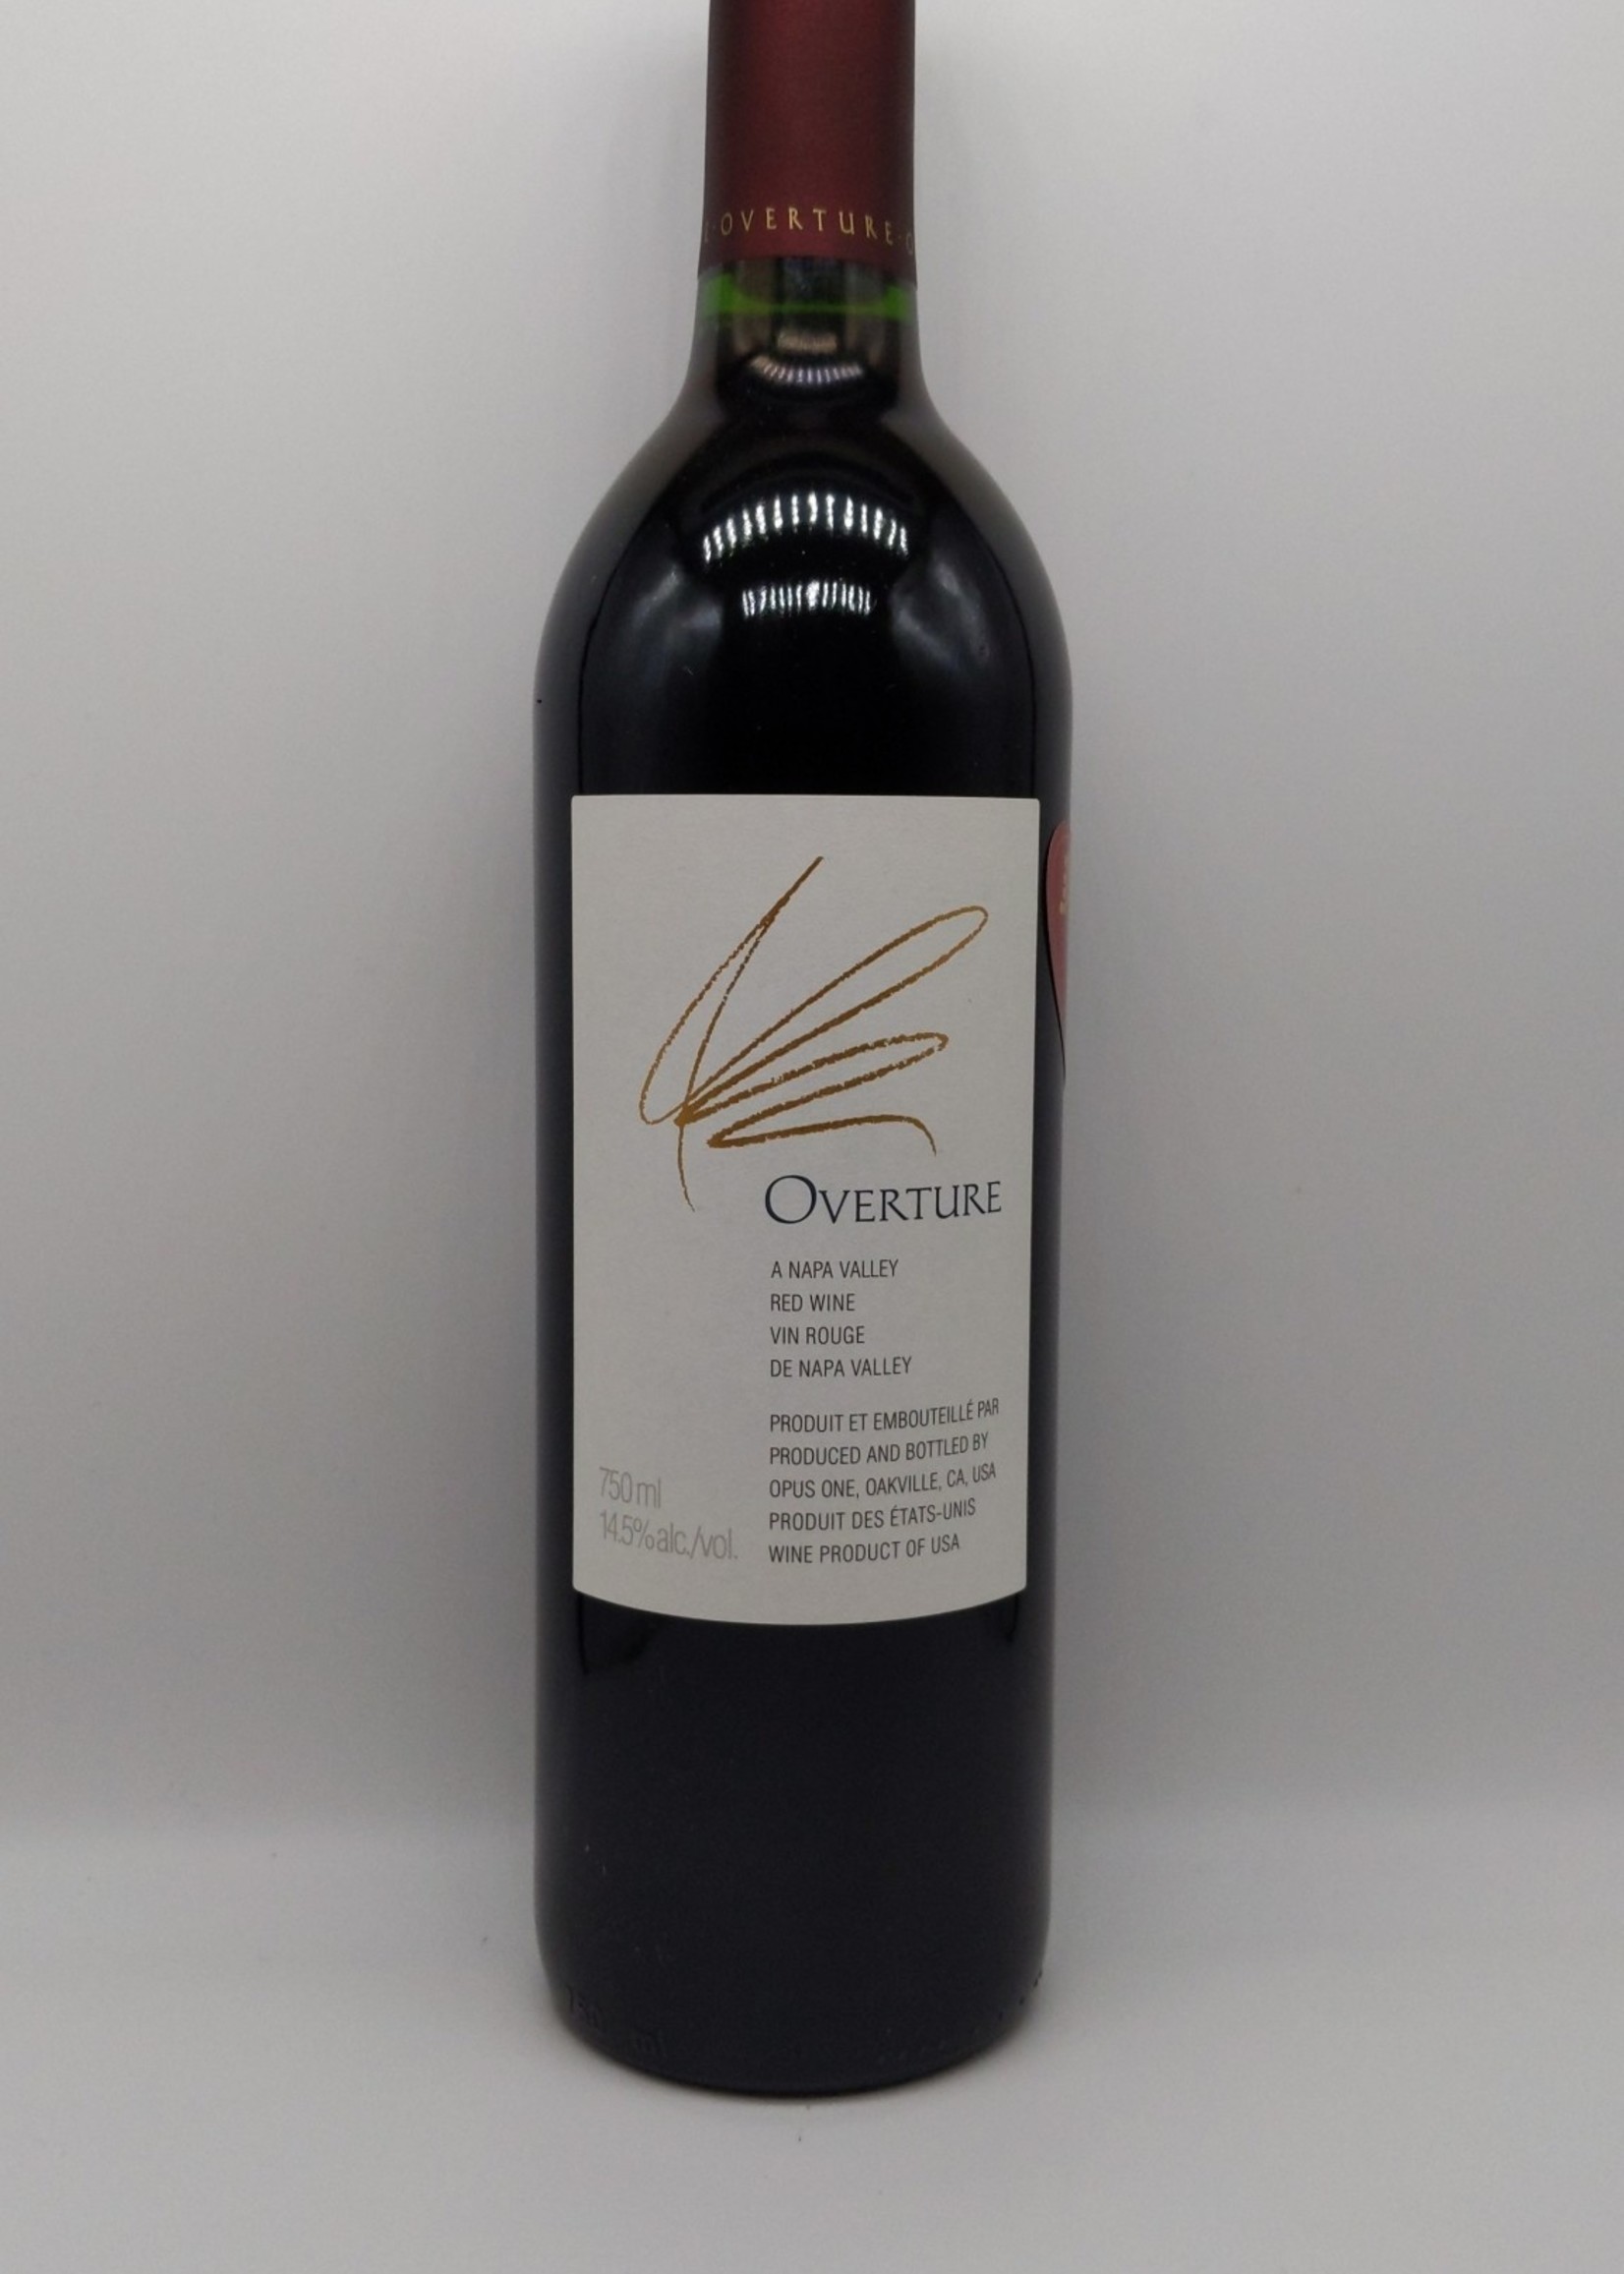 NV OPUS ONE OVERTURE 750ml